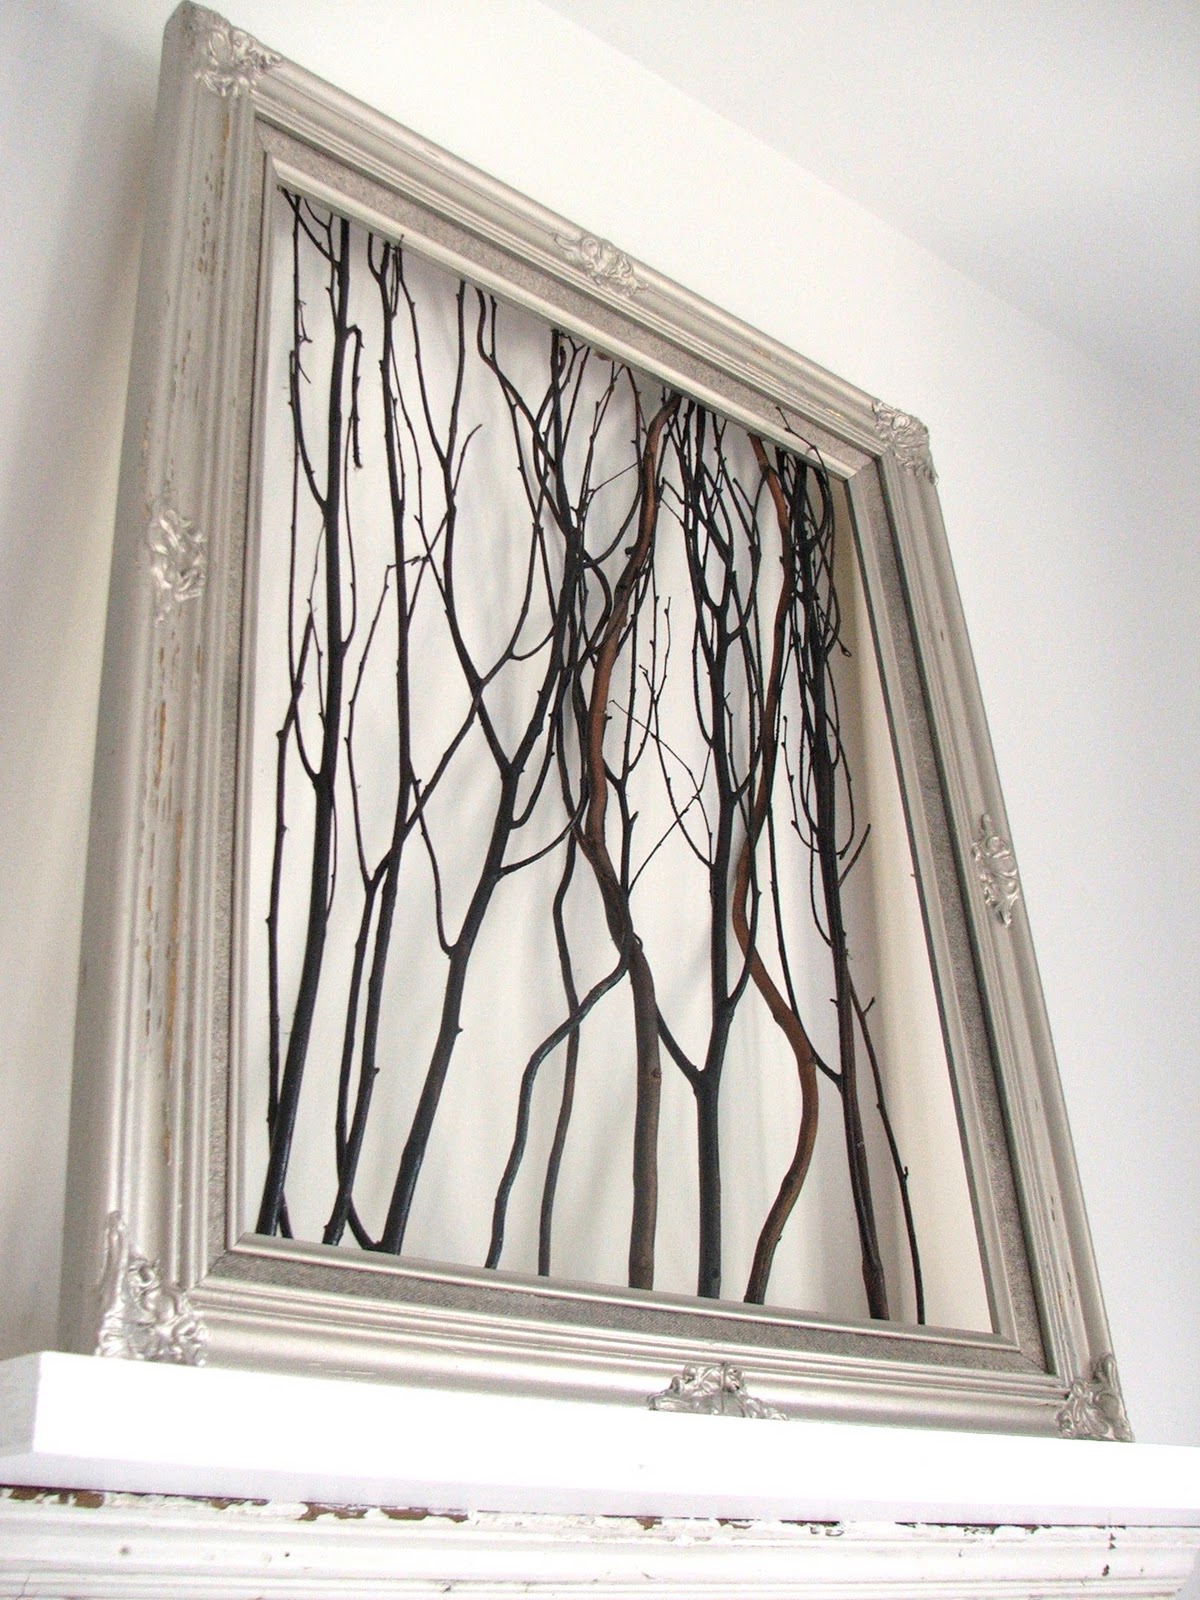 The New Romanticism: Framed! Easy Decorating Ideas Using Empty Picture